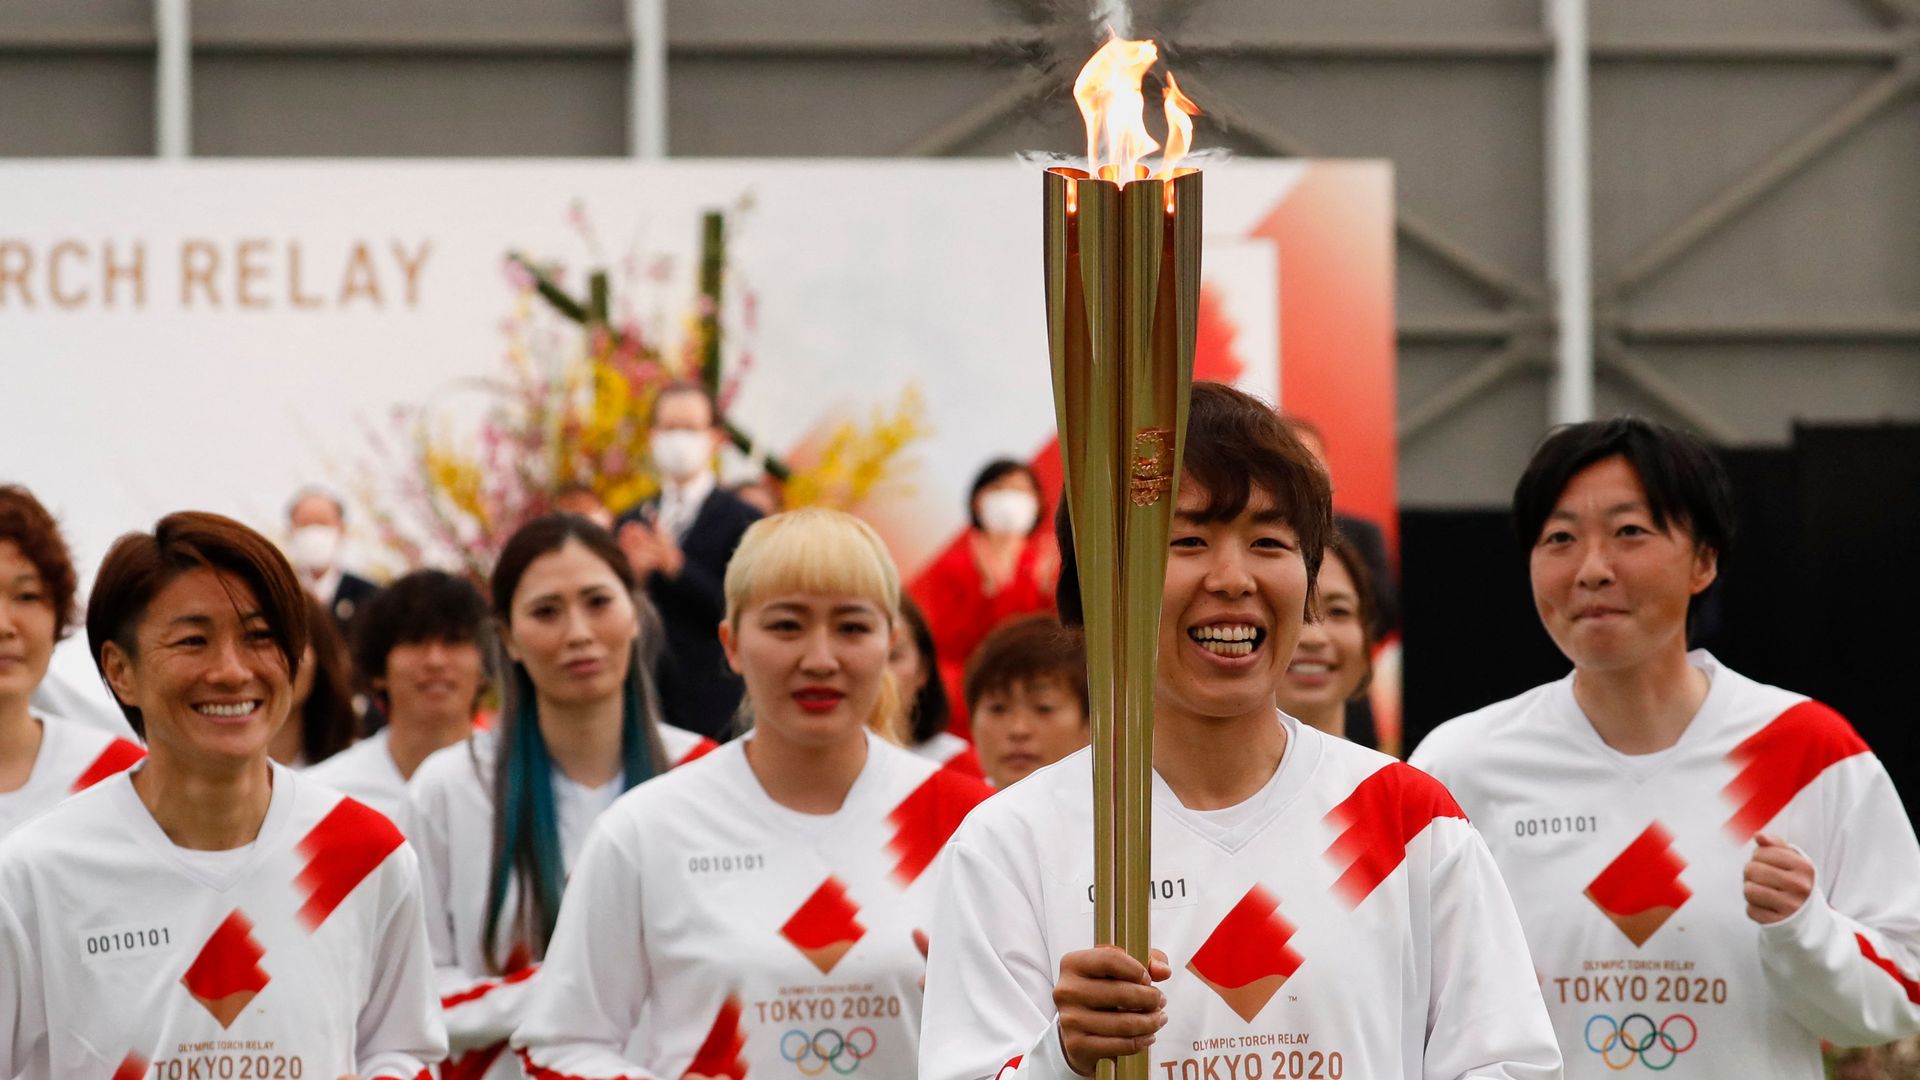 Tokyo 2020 Olympic Torch Relay Grand Start torchbearers from Japan's women's national soccer team, or Nadeshiko Japan, lead the torch relay in Naraha, Fukushima prefecture on March 25